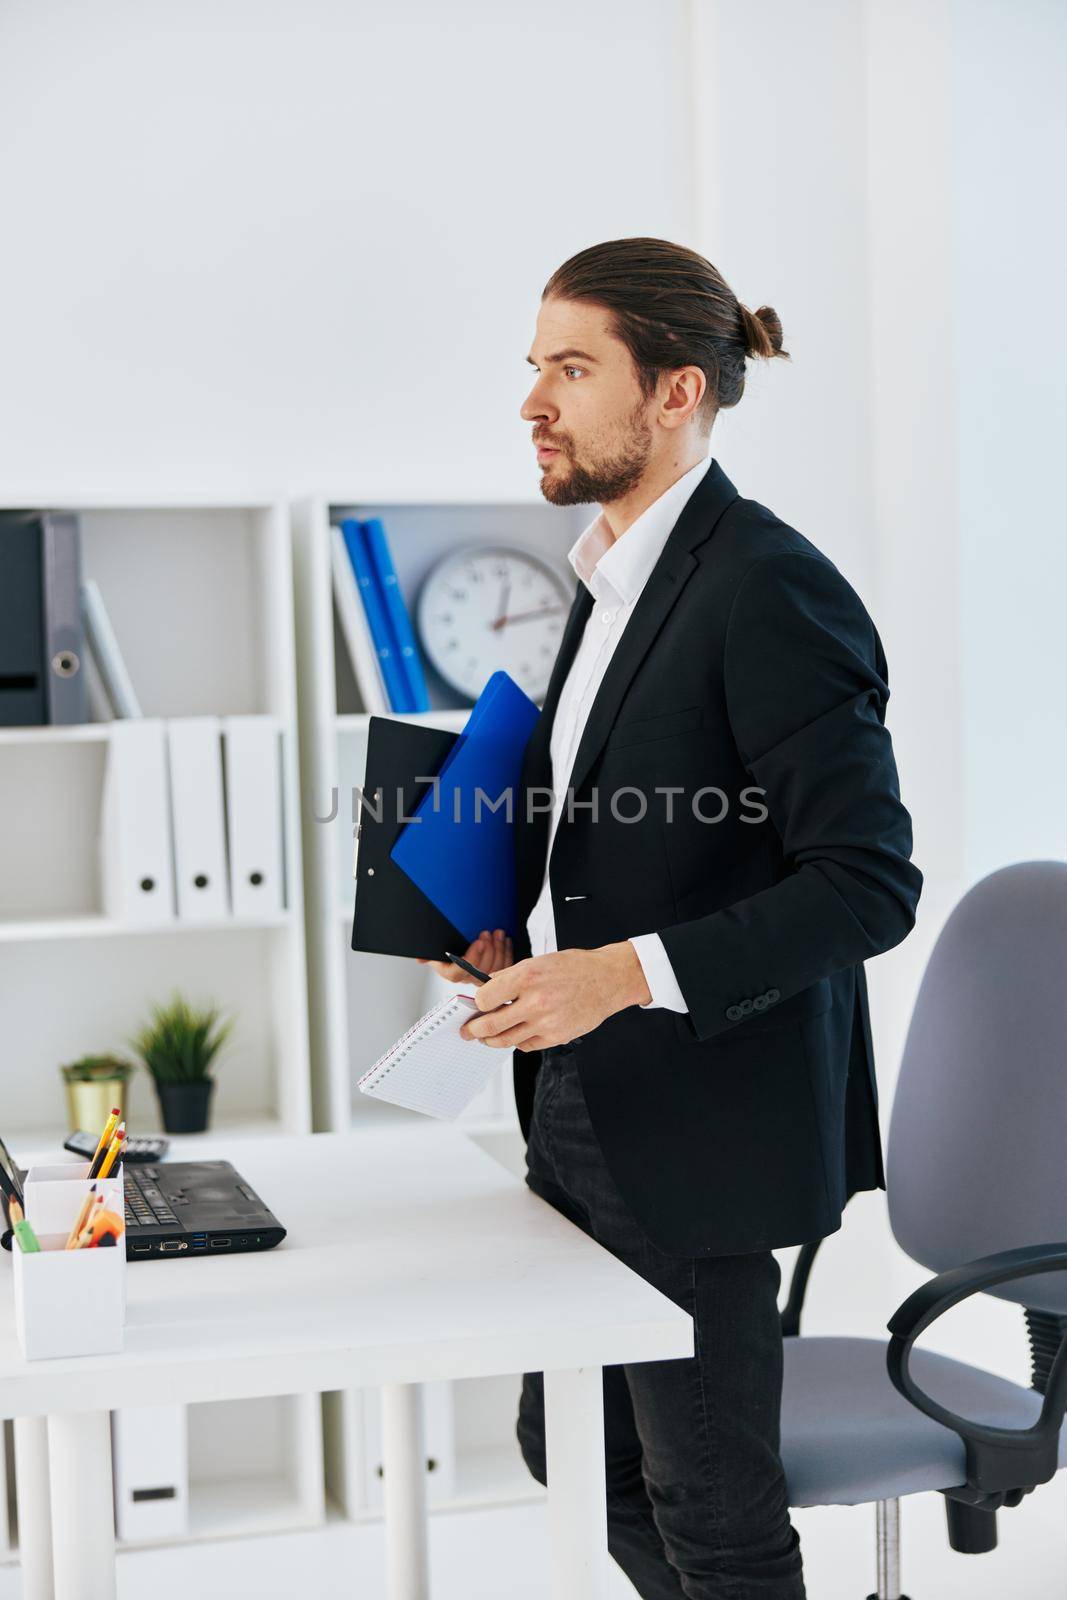 businessmen workflow in the office documents emotions boss. High quality photo